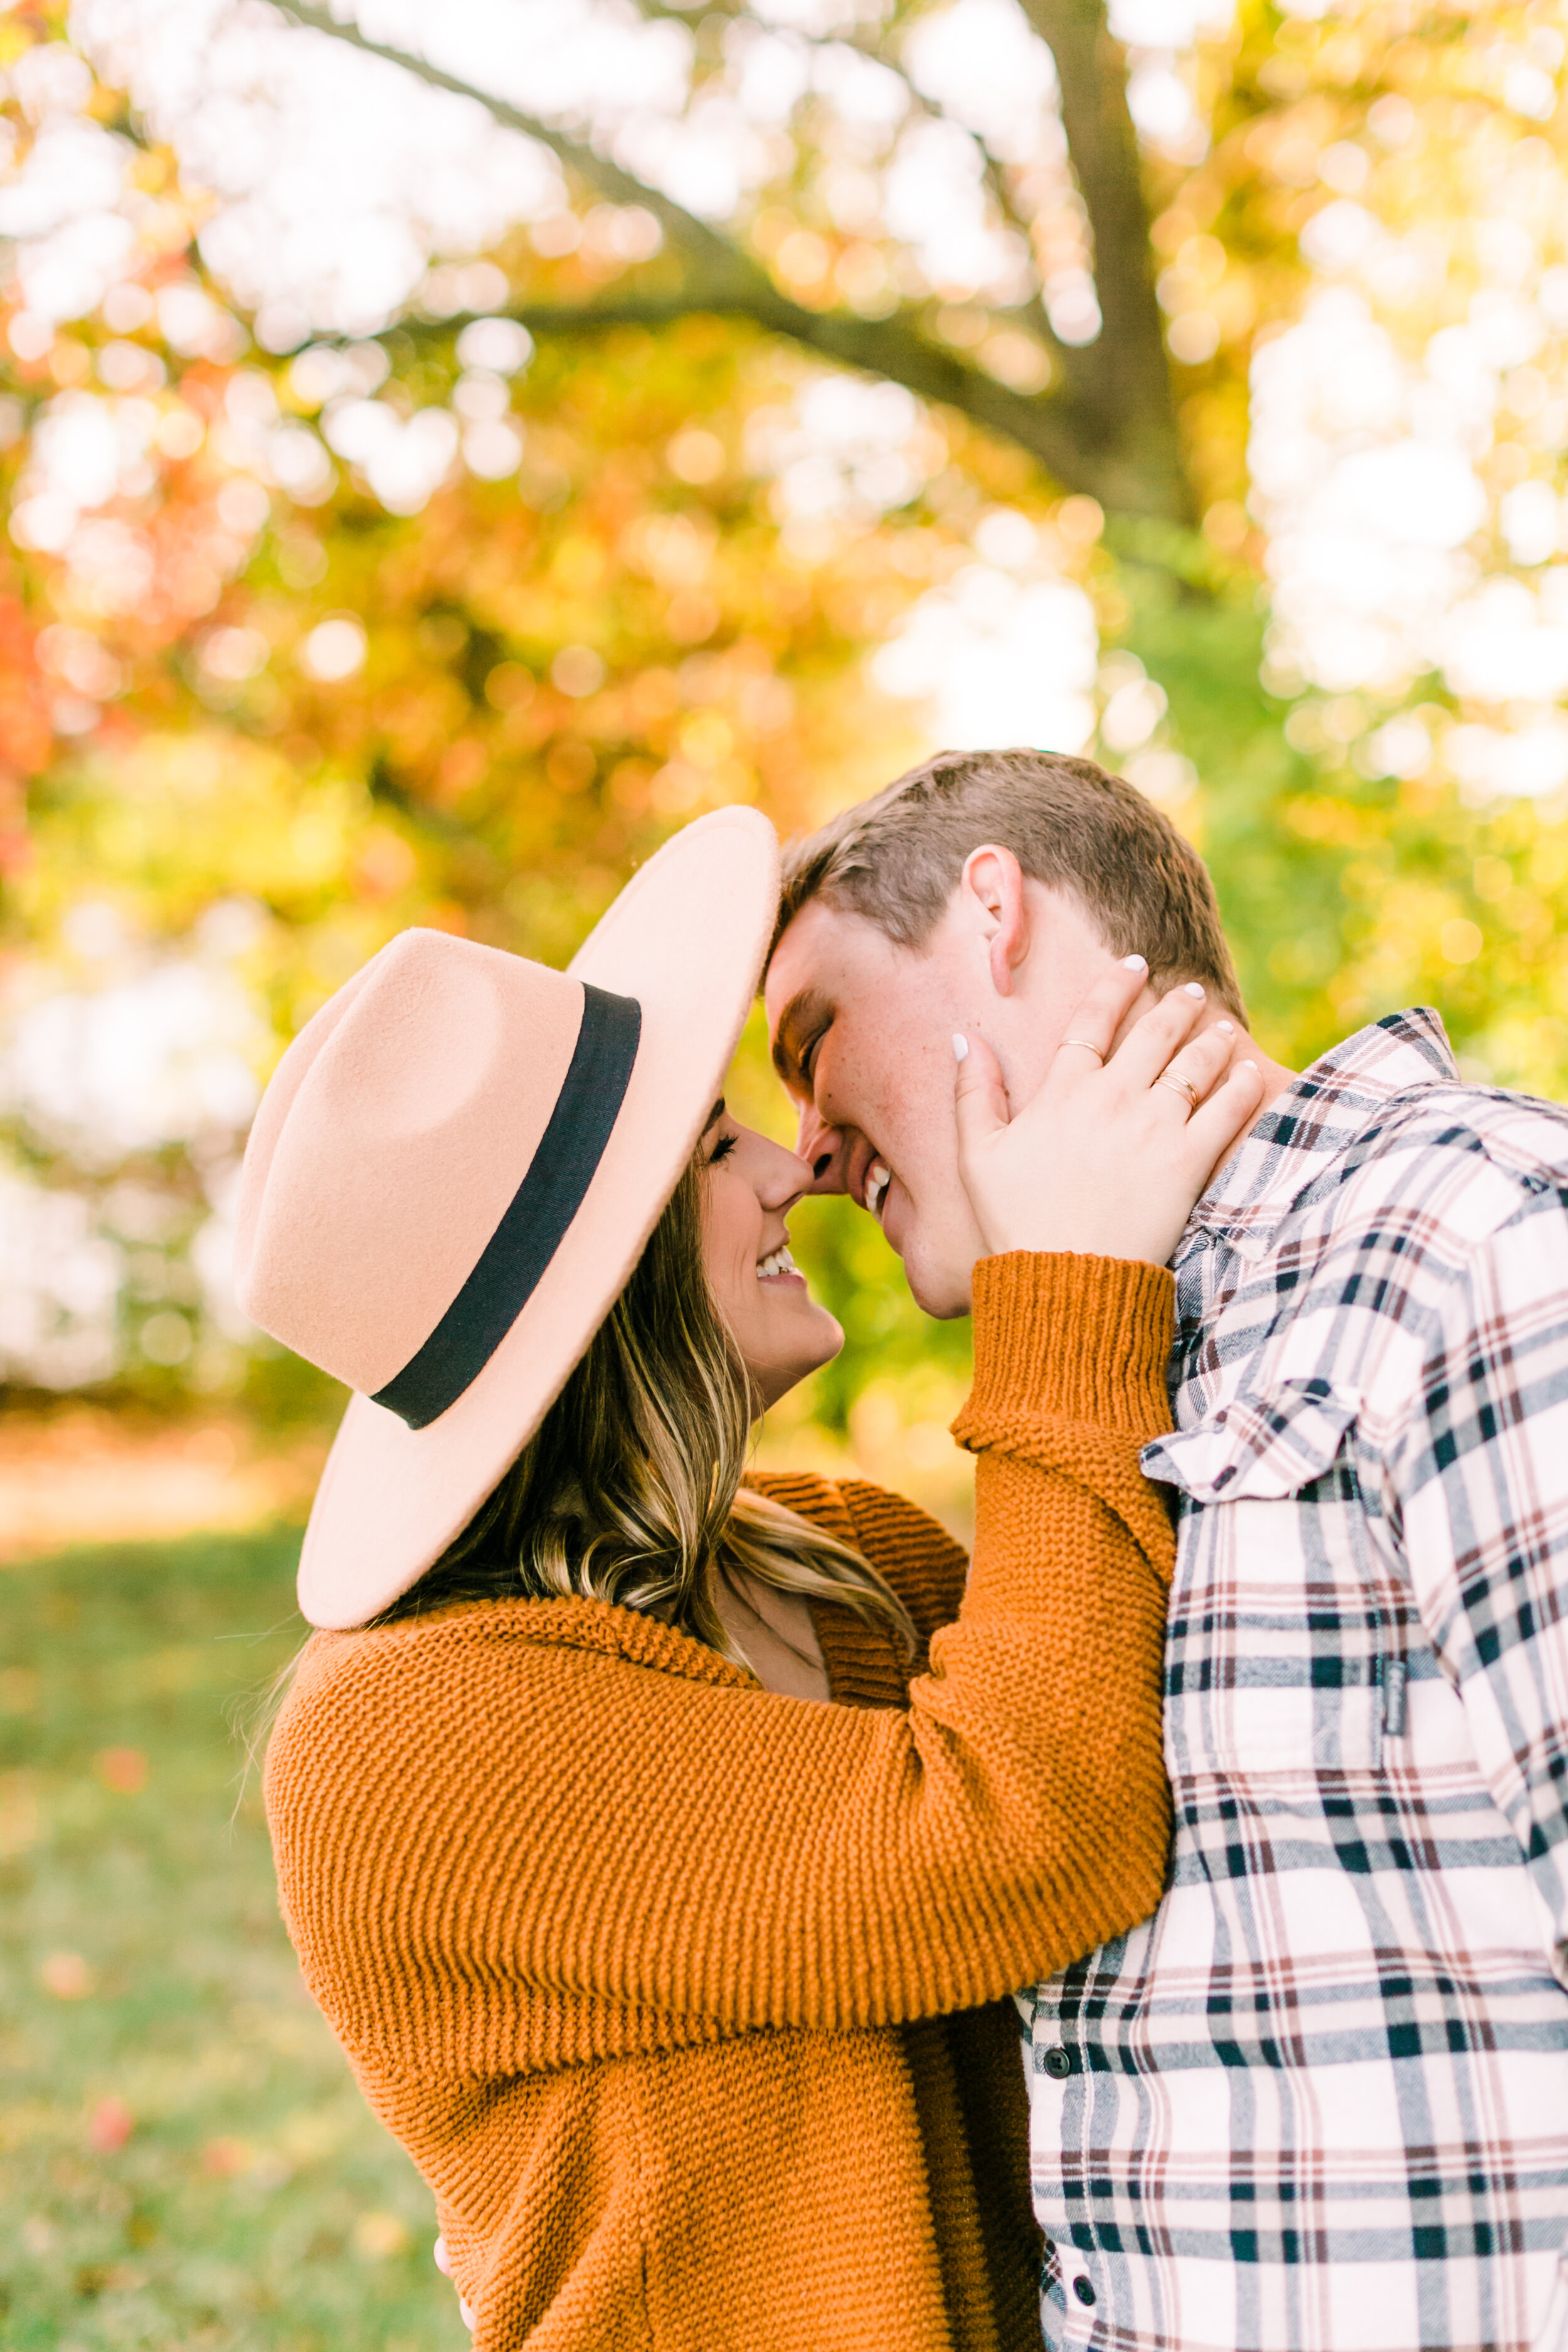 Tennessee+Fall+Engagement+Photos+Puppy (32 of 63).jpg